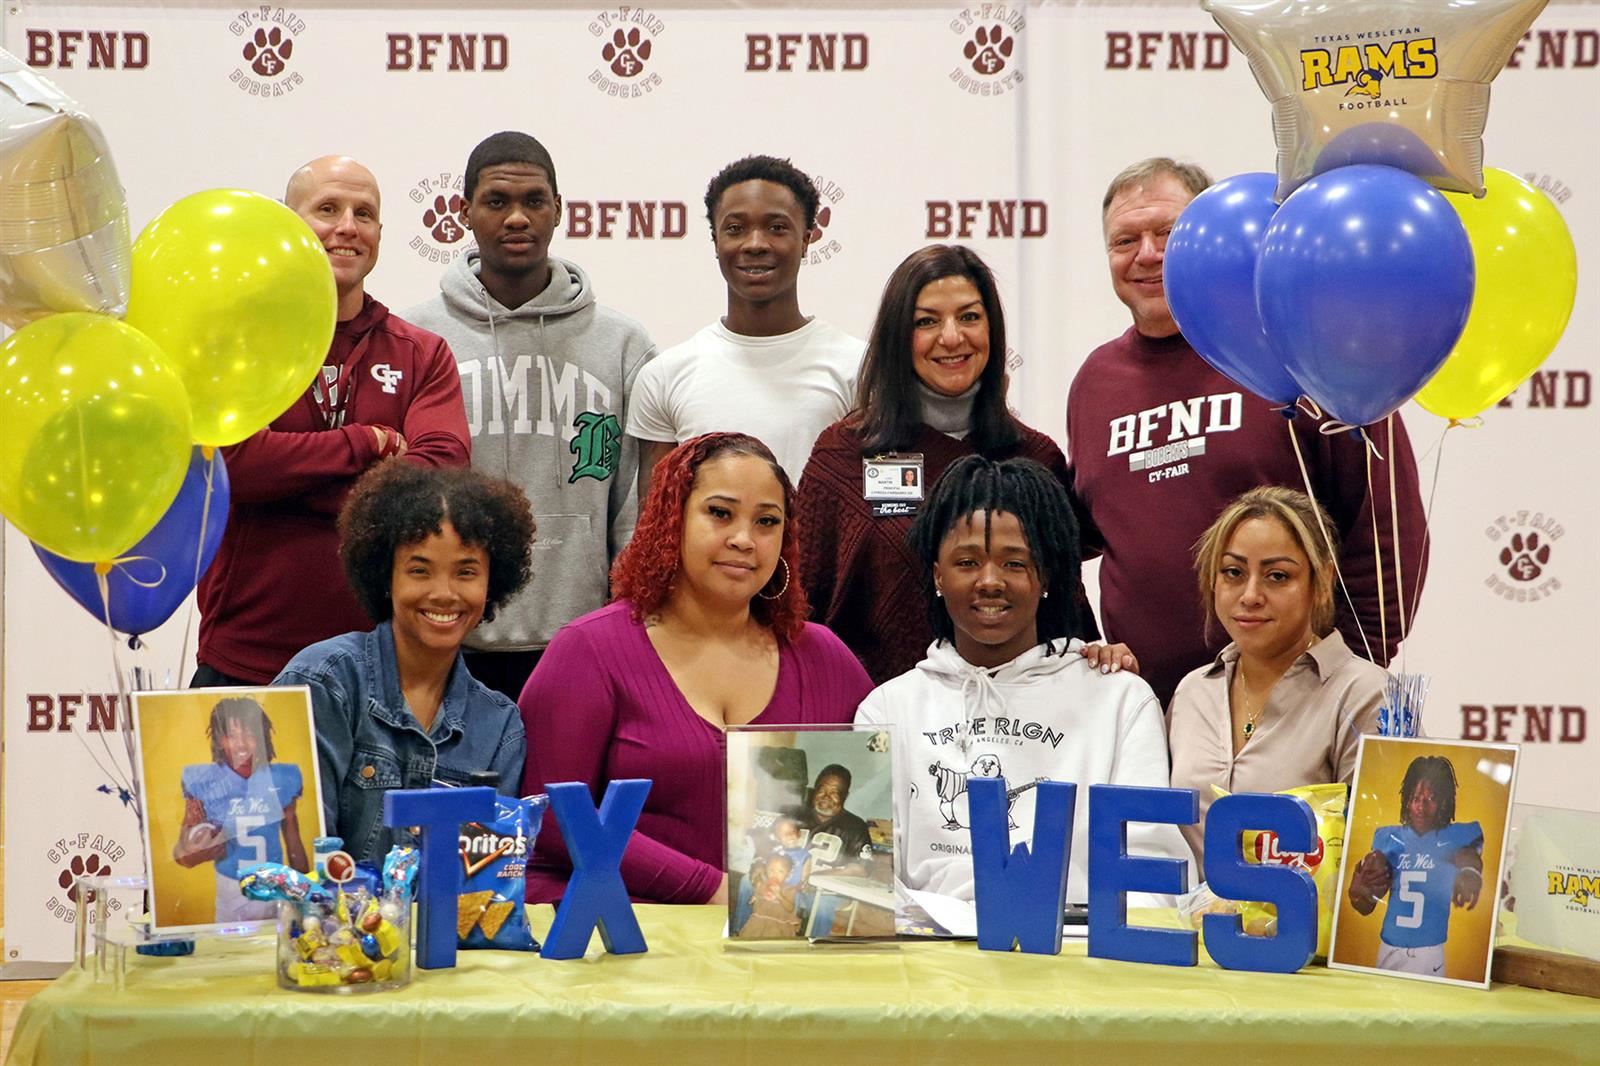 Cy-Fair High School senior Shawn Atkins, seated second from right, signed a letter of intent.